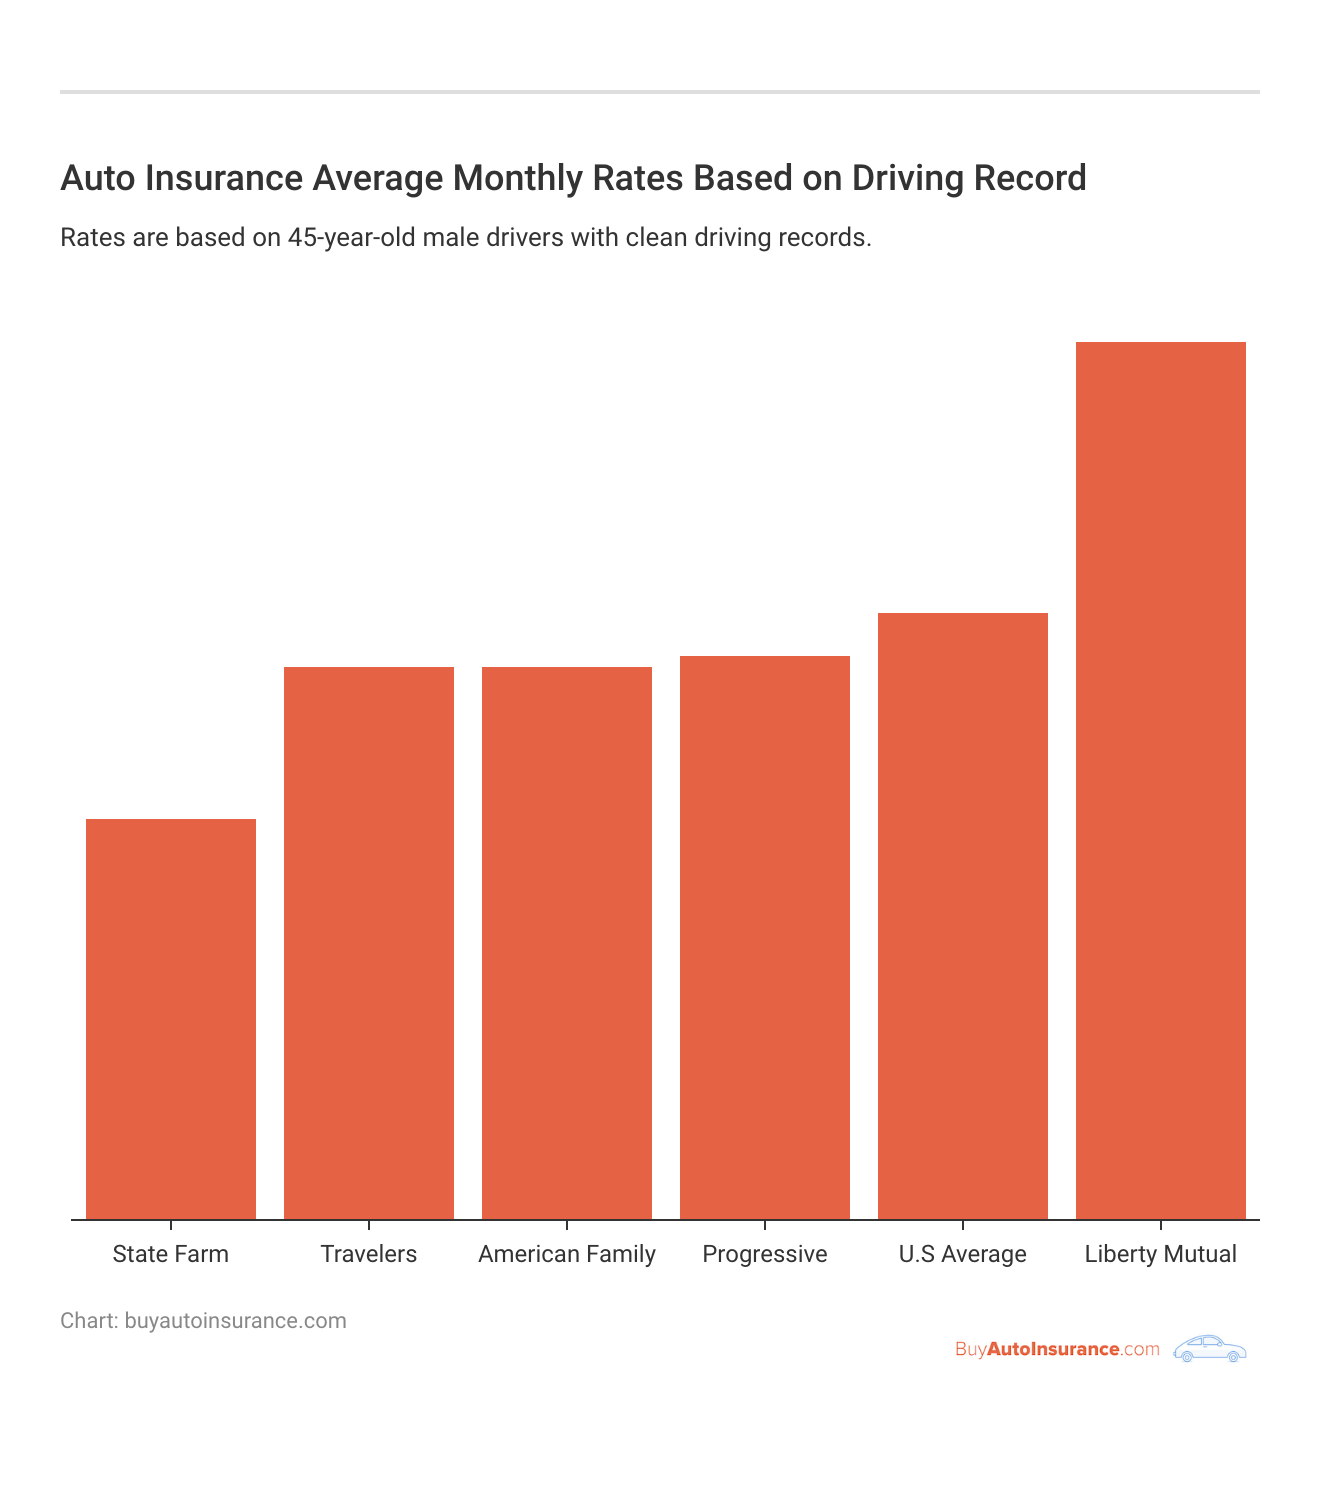 <h3>Auto Insurance Average Monthly Rates Based on Driving Record</h3>